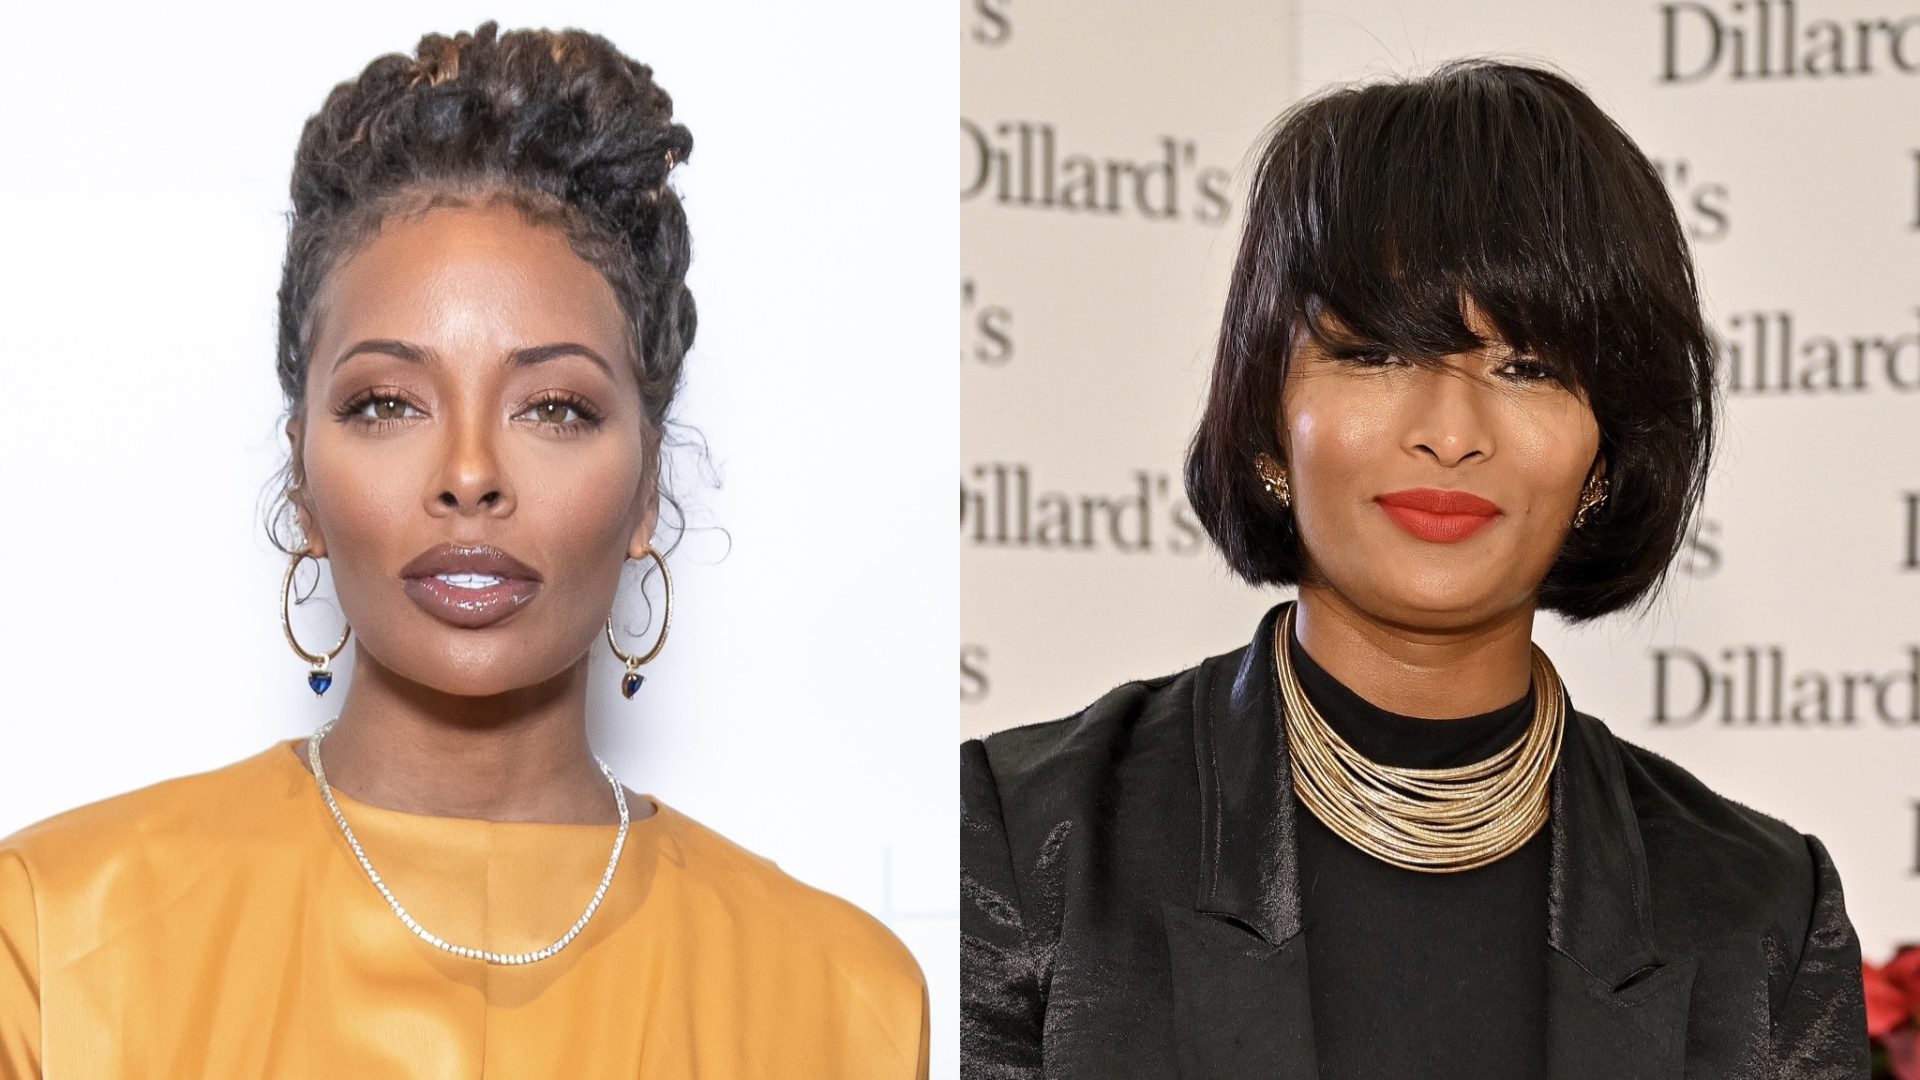 America's Top Finessers! Eva Marcille & Toccara Jones Reveal How They Landed Their 'ANTM' Auditions (Video)